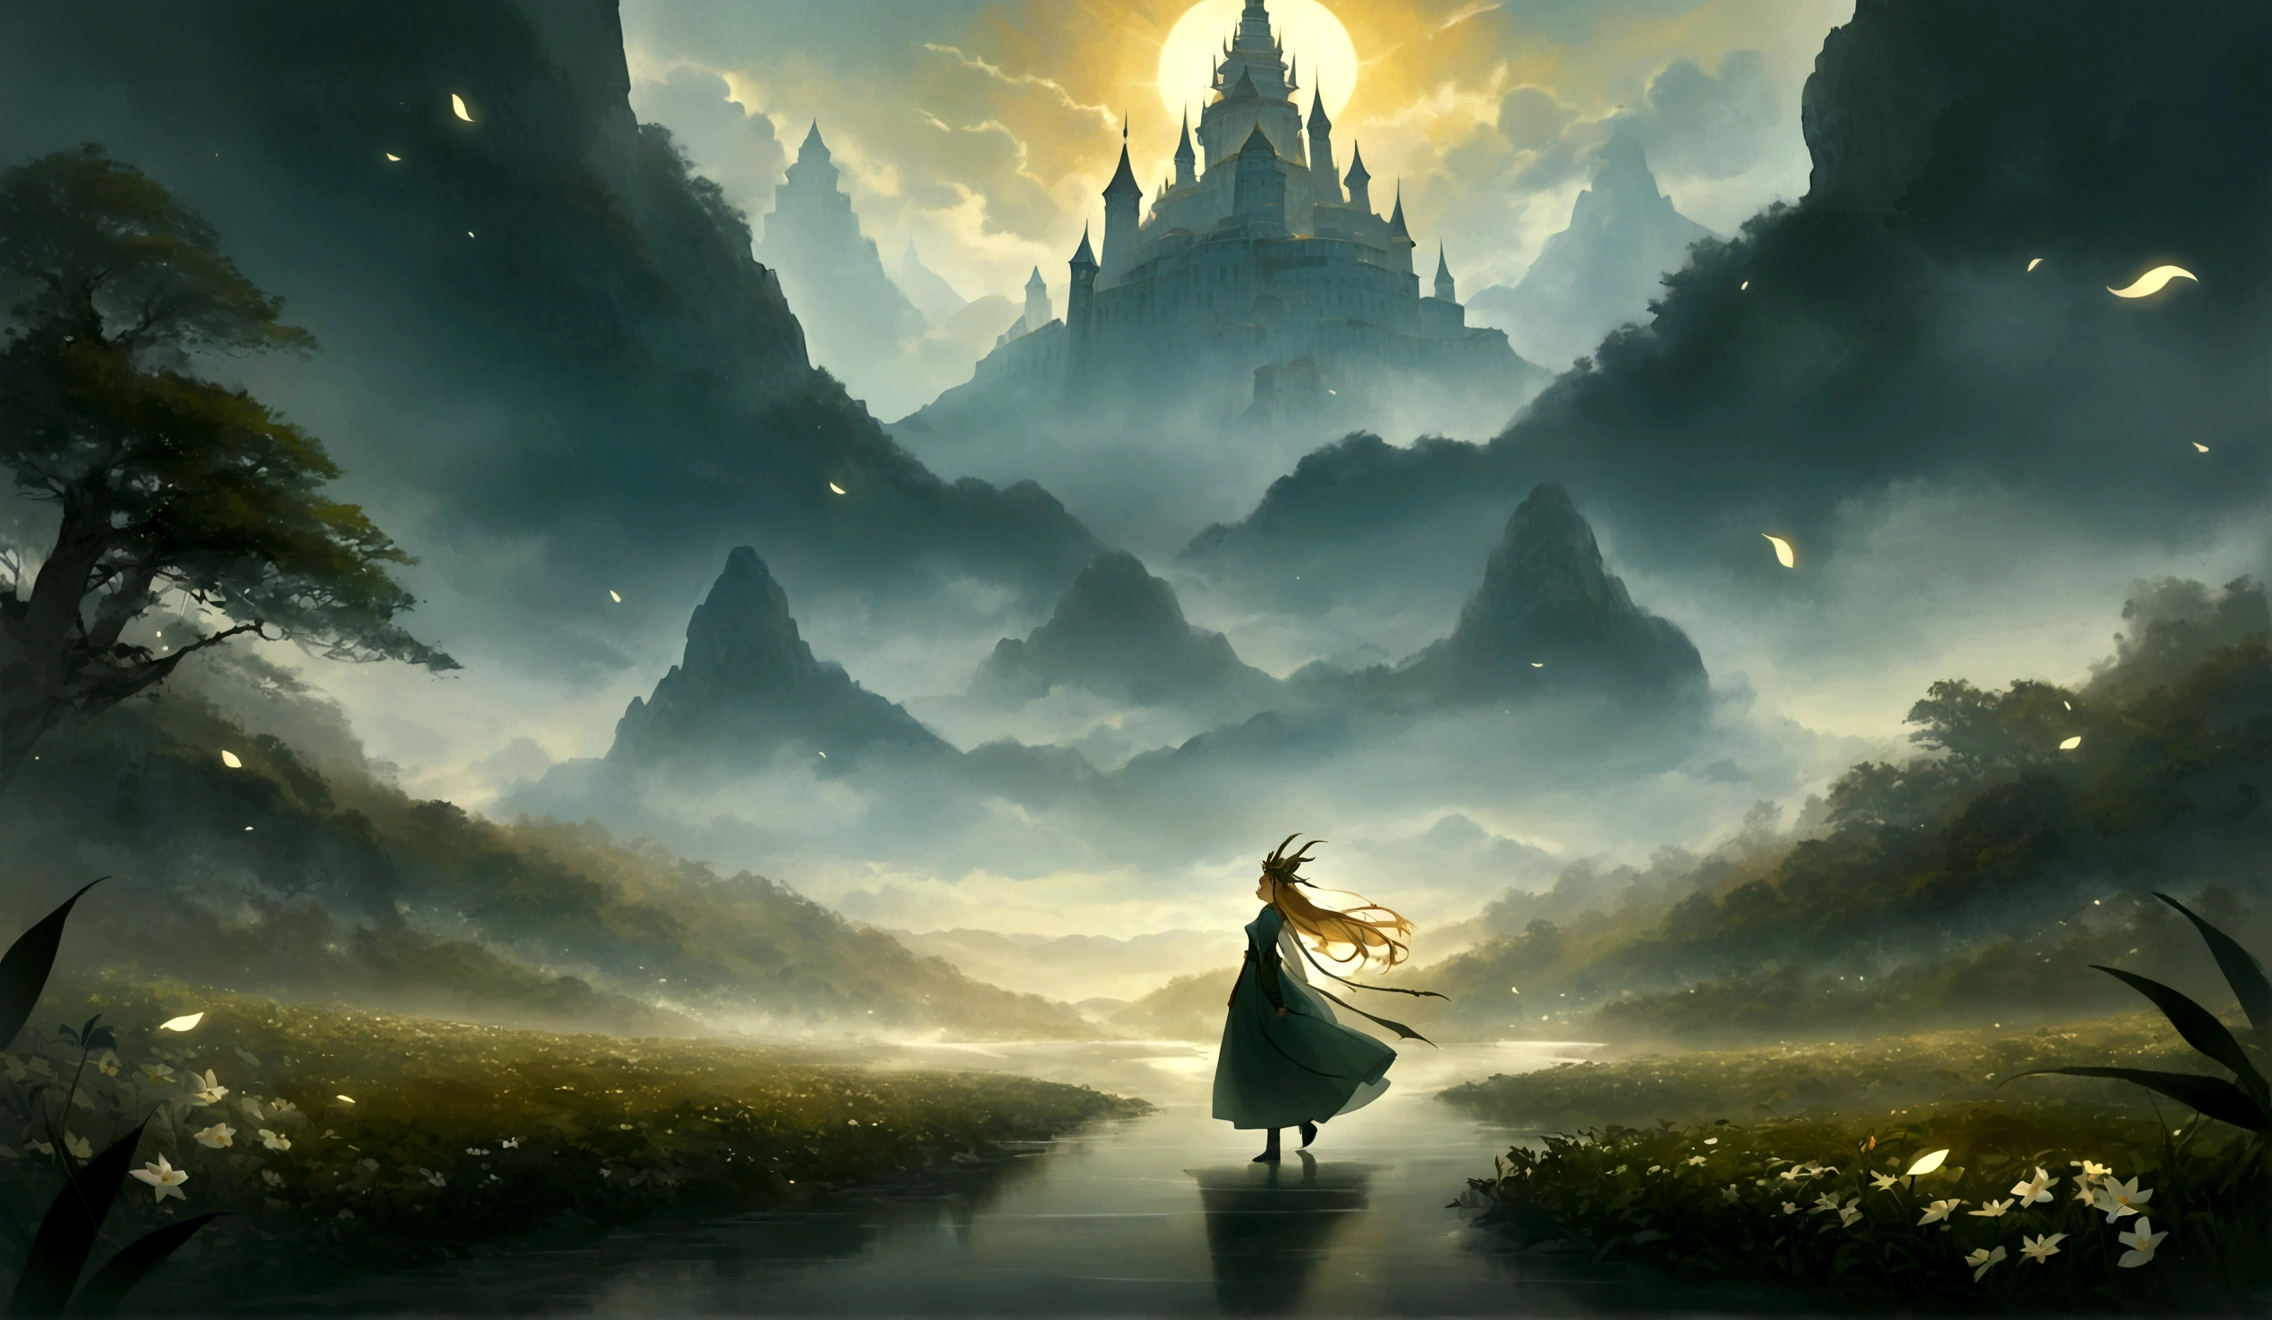 

The scene is set in a fantastical realm where magic and ancient traditions intertwine seamlessly. Majestic mountains loom in the distance, their peaks shrouded in mist, hinting at the mysteries they conceal. A serene river meanders through the lush, verdant landscape, its waters sparkling under the golden rays of a setting sun. On one bank stands a grand palace with towering spires, its architecture a blend of elegance and grandeur, reflecting the opulence of a bygone era.

In the foreground, a dense forest teems with life, the trees towering and ancient, their leaves whispering secrets of old. The air is filled with the scent of blooming flowers and the distant calls of mythical creatures. At the heart of this enchanting world stands a solitary figure, their presence commanding and aura imbued with a sense of pride and arrogance inherited from an ancient legacy. The scene is both serene and charged with an underlying tension, a perfect blend of beauty and latent power.